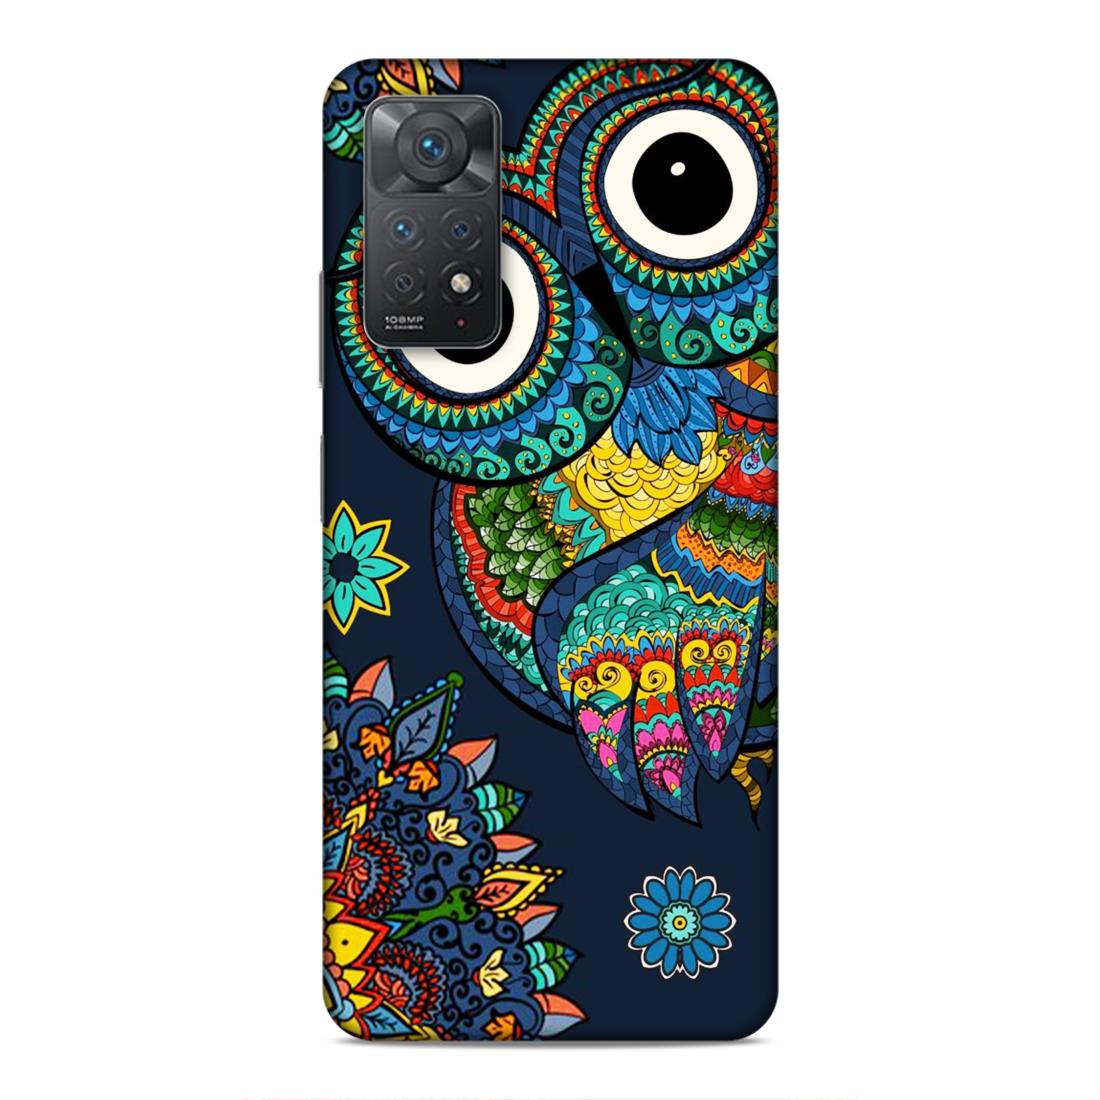 Owl and Mandala Flower Hard Back Case For Xiaomi Redmi Note 11 Pro 4G / 5G / Note 11 Pro Plus 5G